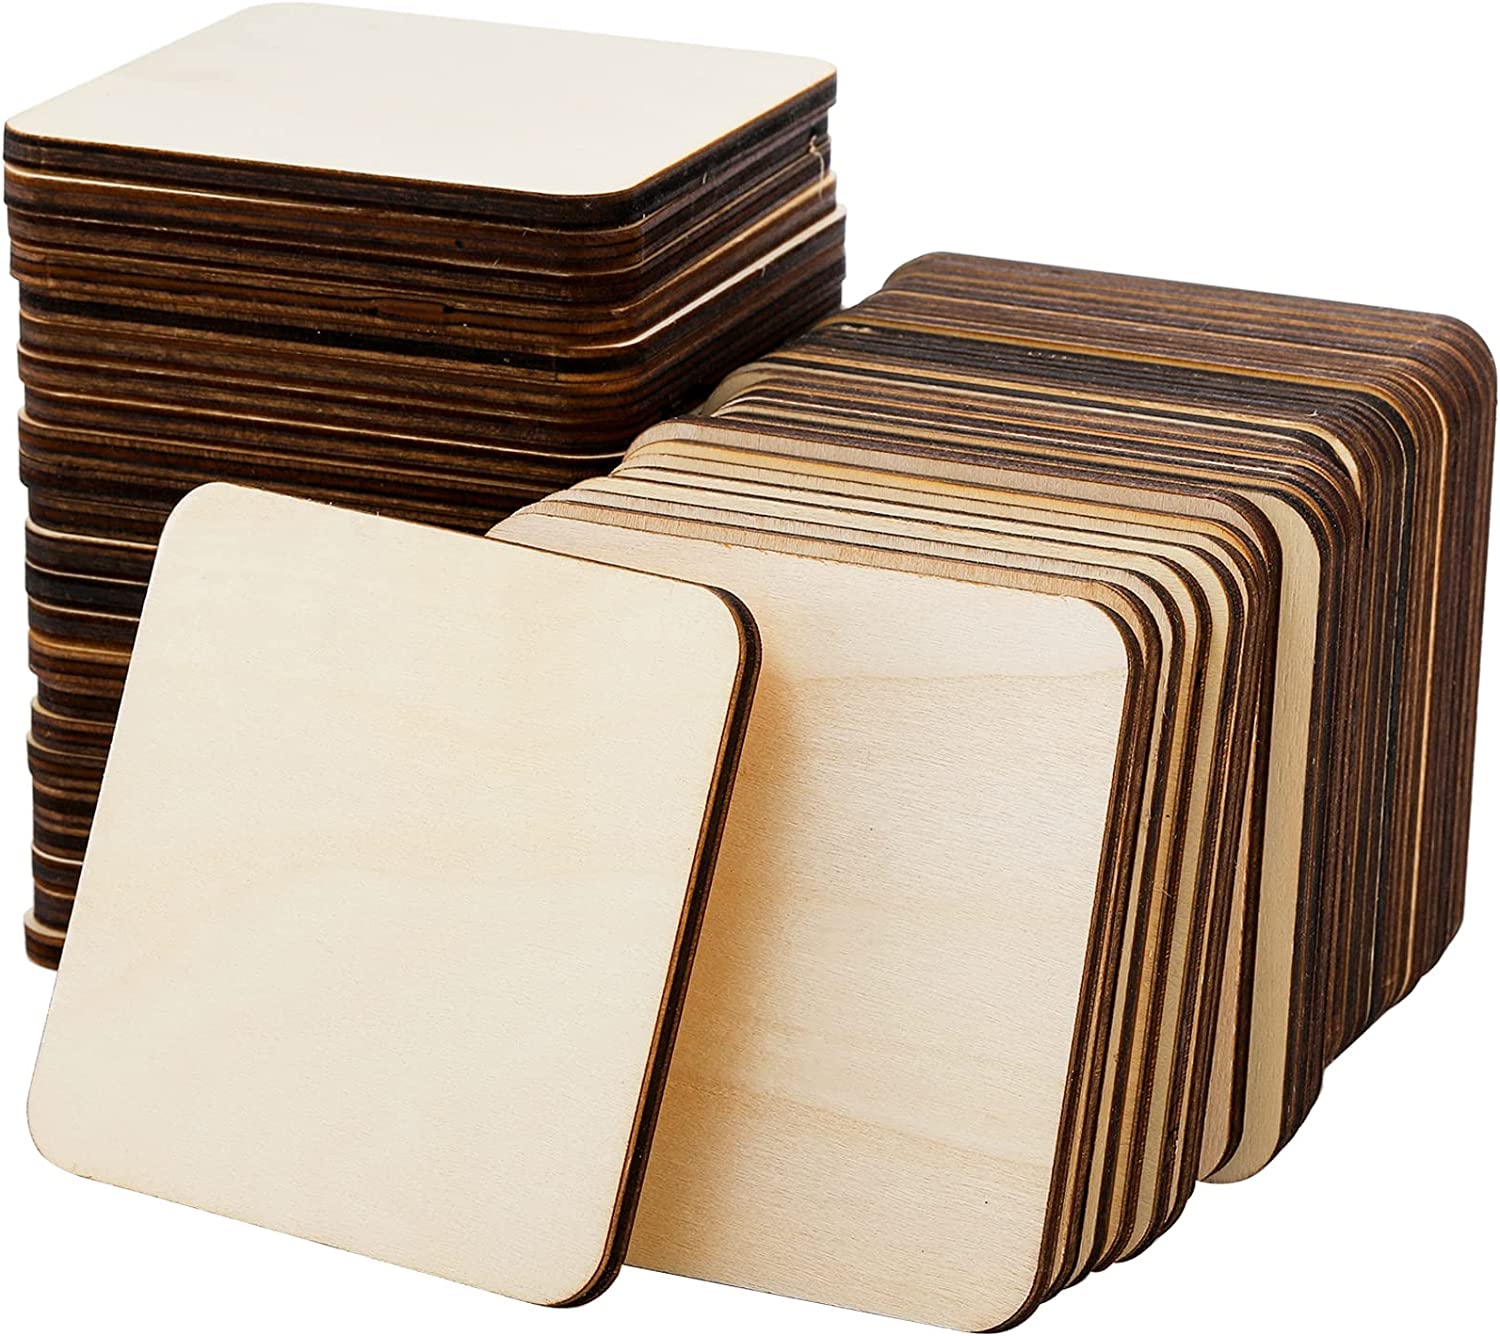 12 Pieces Unfinished Wood Coasters, GOH DODD 4 Inch Square Blank Wooden  Coasters Crafts Coasters for DIY Architectural Models Drawing Painting Wood